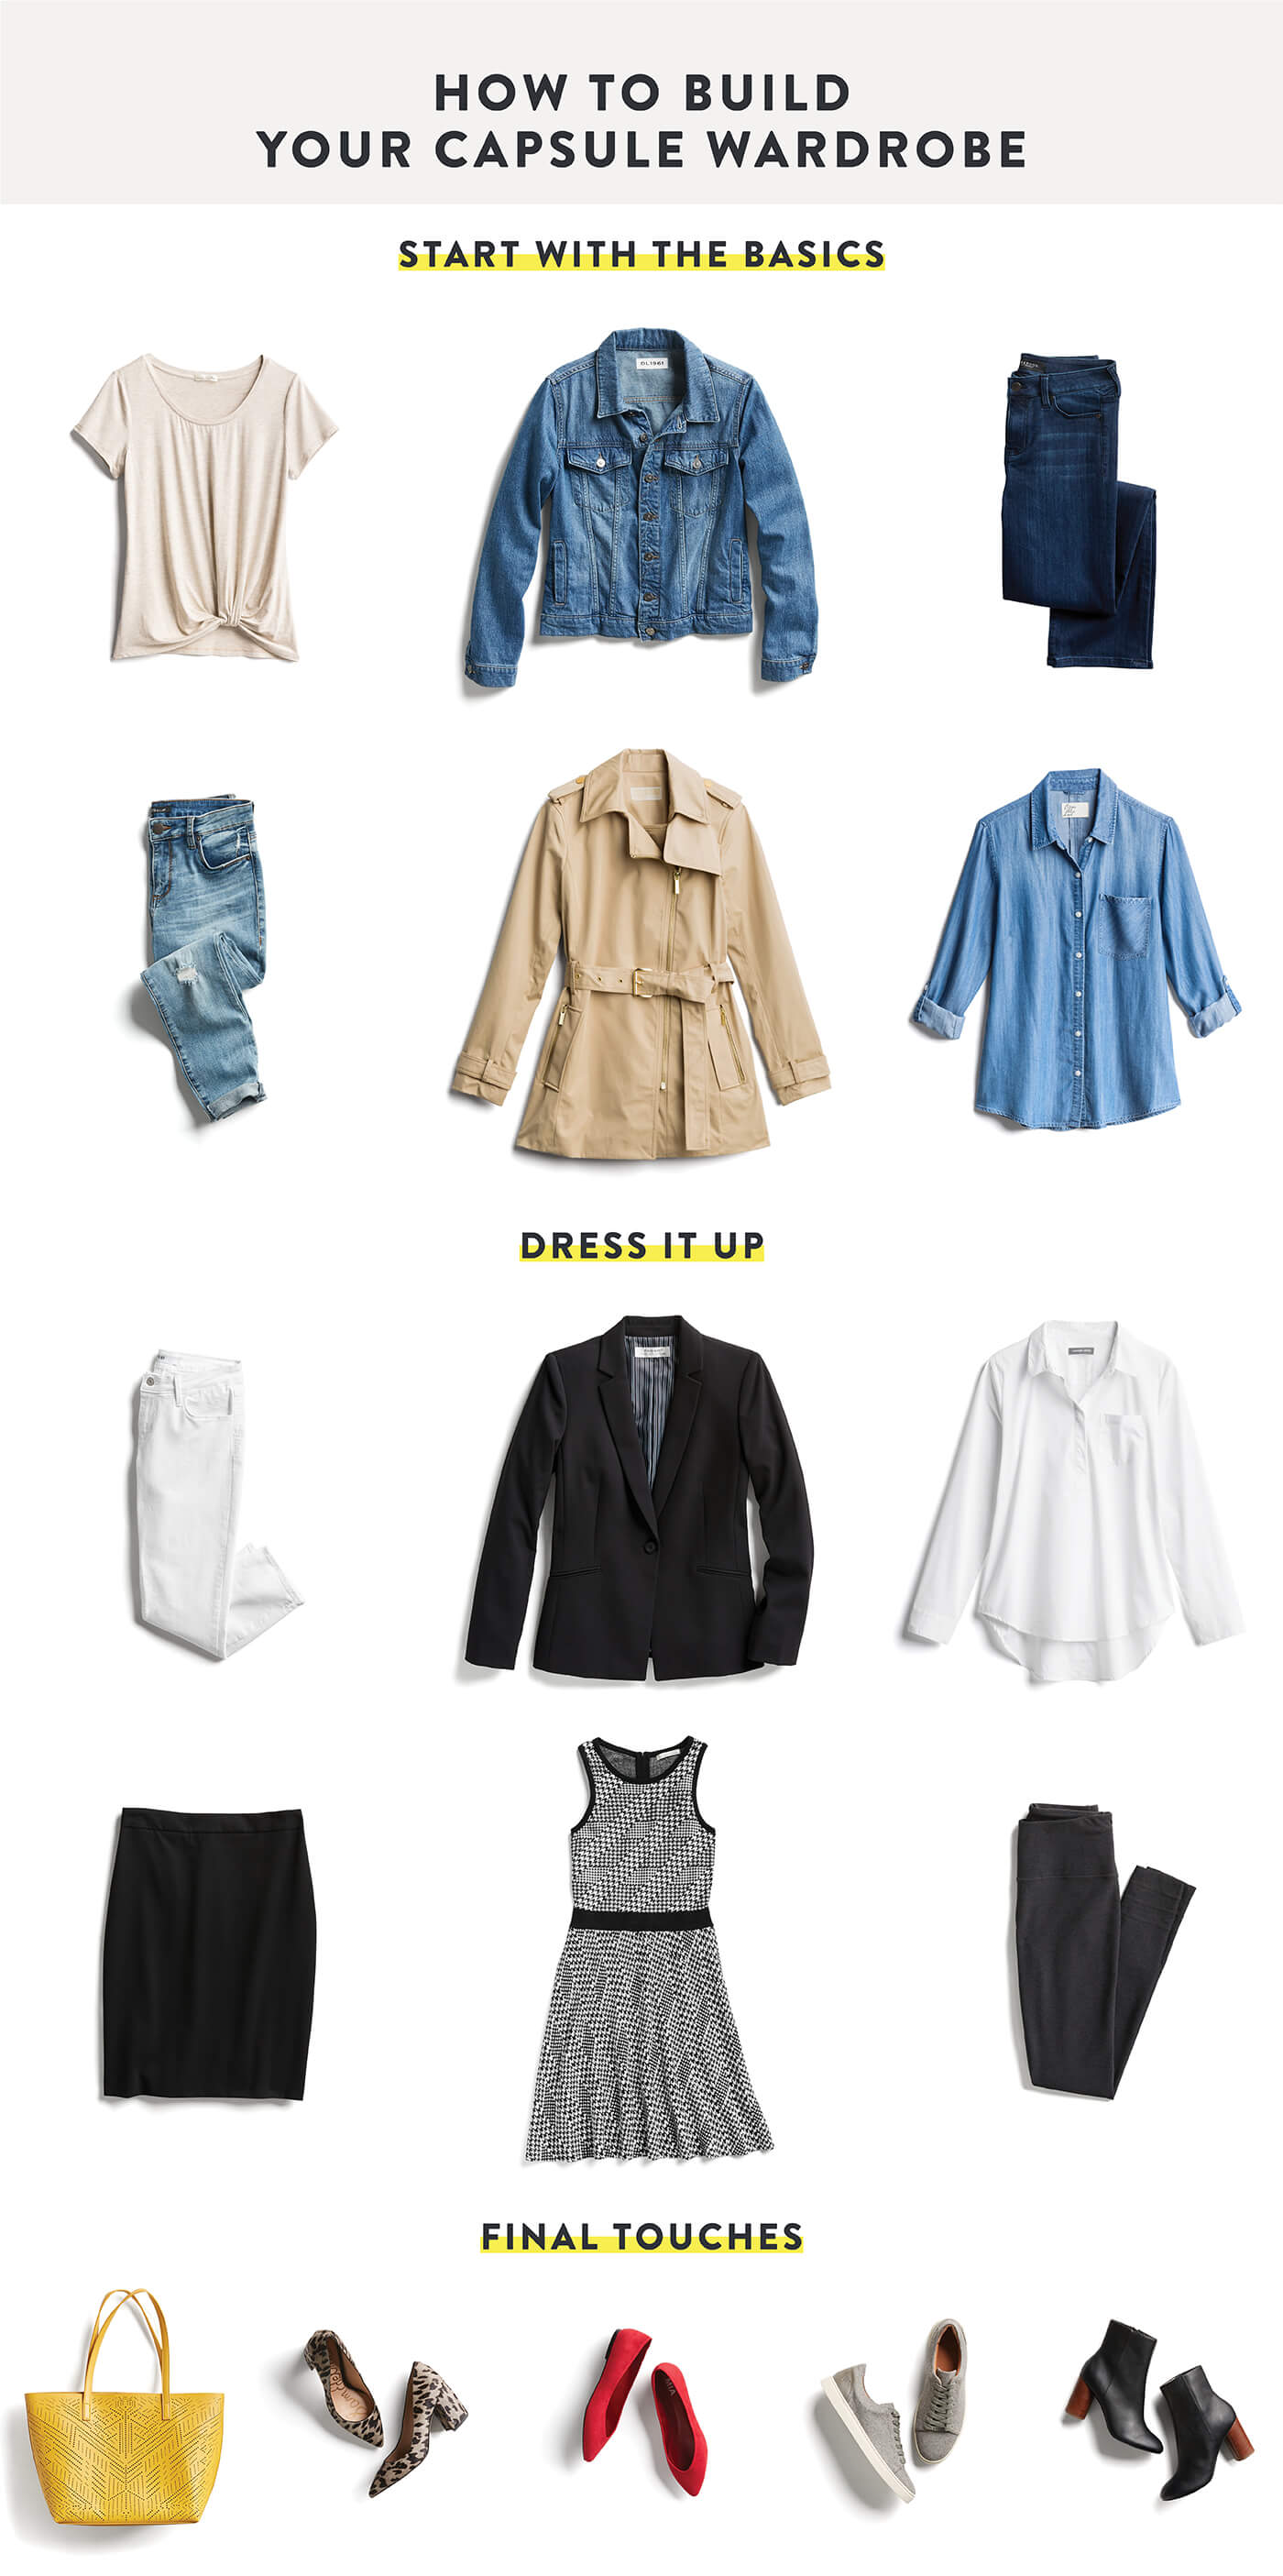 Extreme Cold Capsule Wardrobe for Women